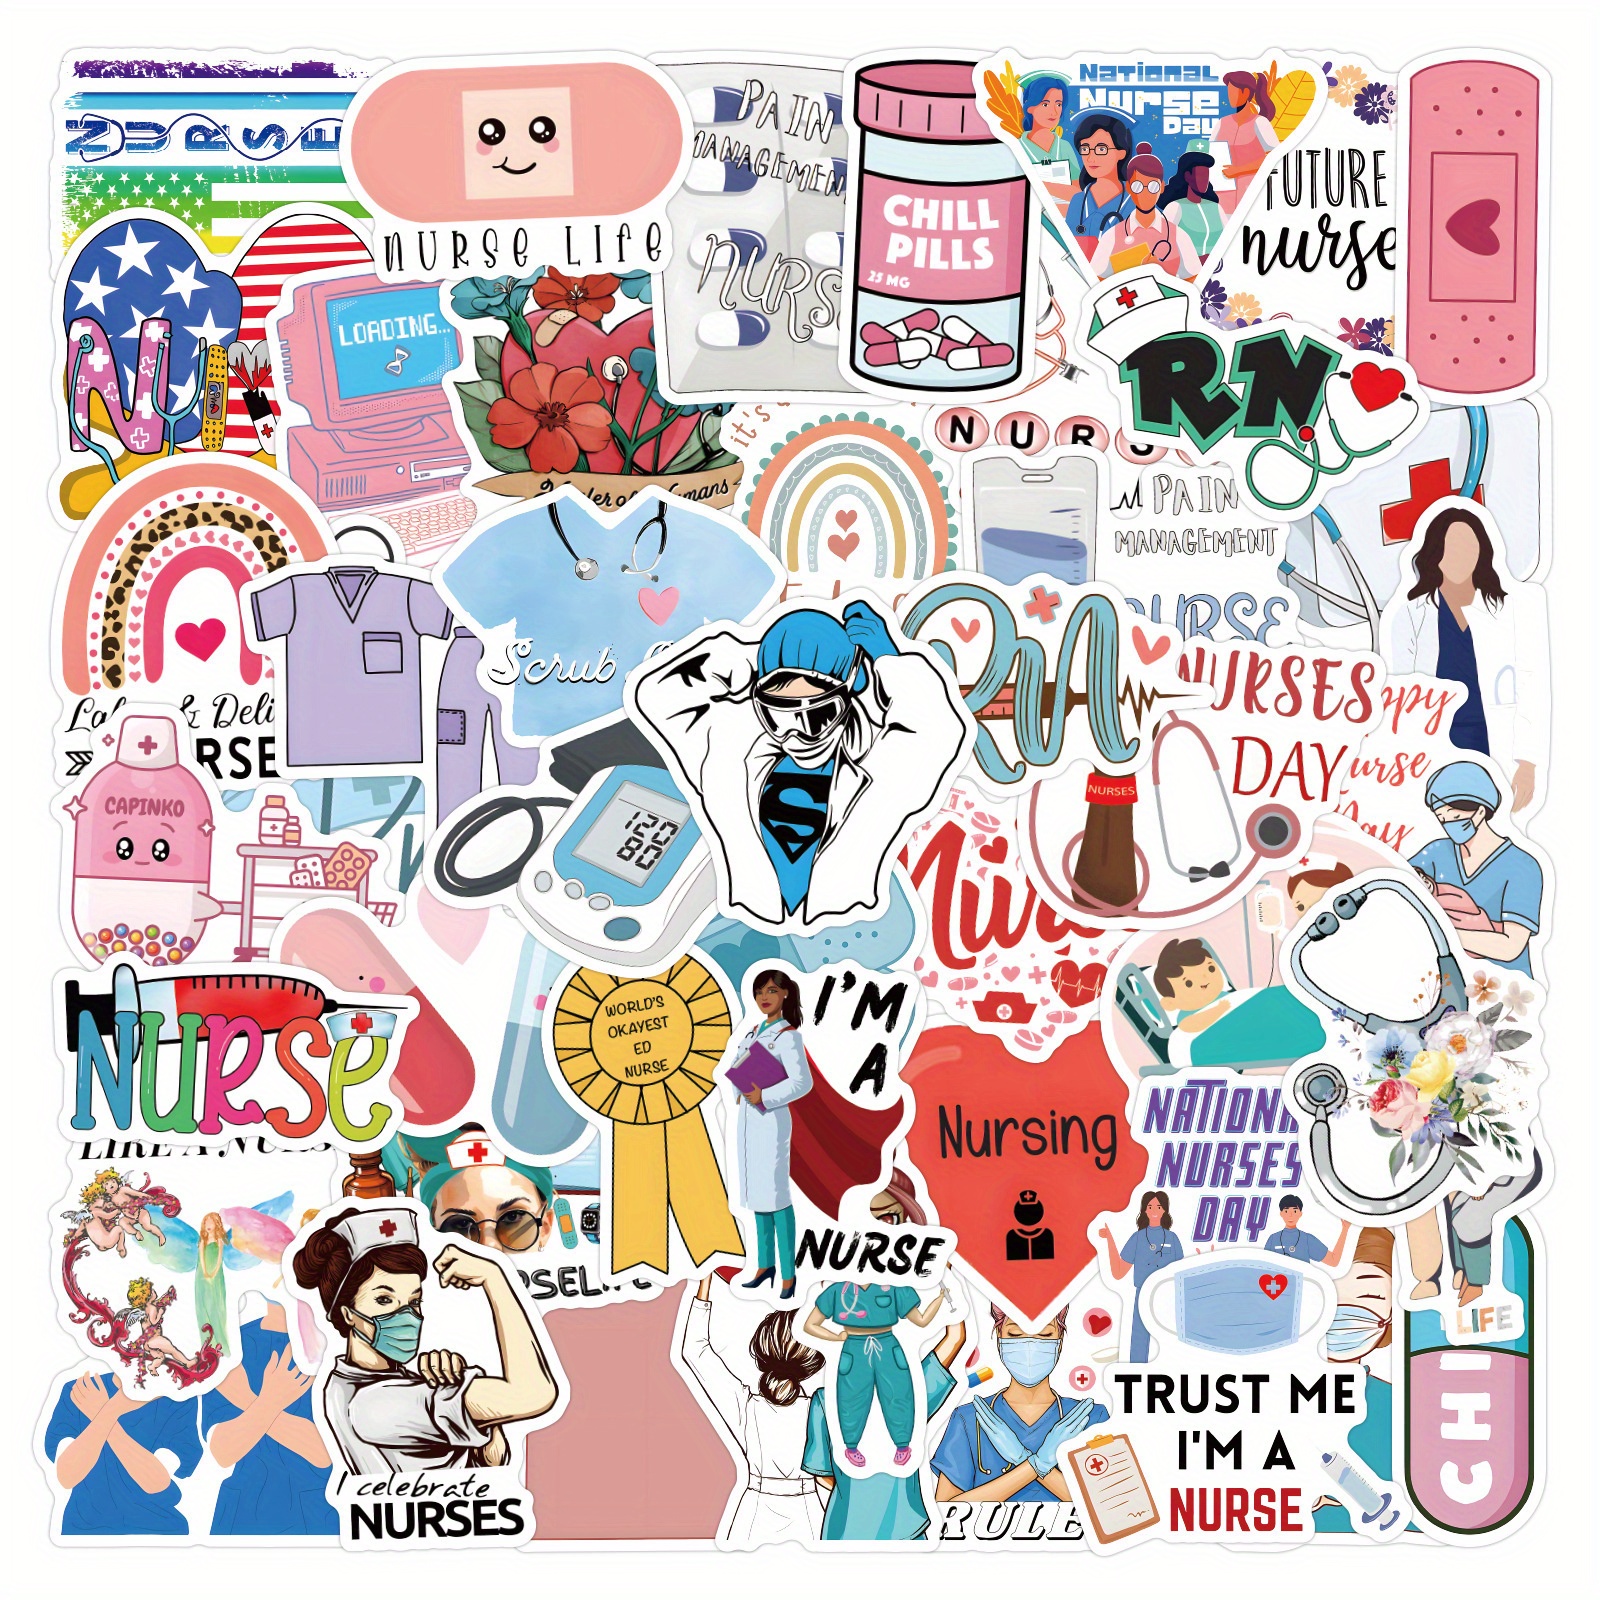 110PCS Medical Assistant Stickers Nursing Stickers Nursing School Stickers  Medical Stickers Vinyl Waterproof Stickers for Water  Bottle,Computer,Laptop,Phone,Luggage,Notebook